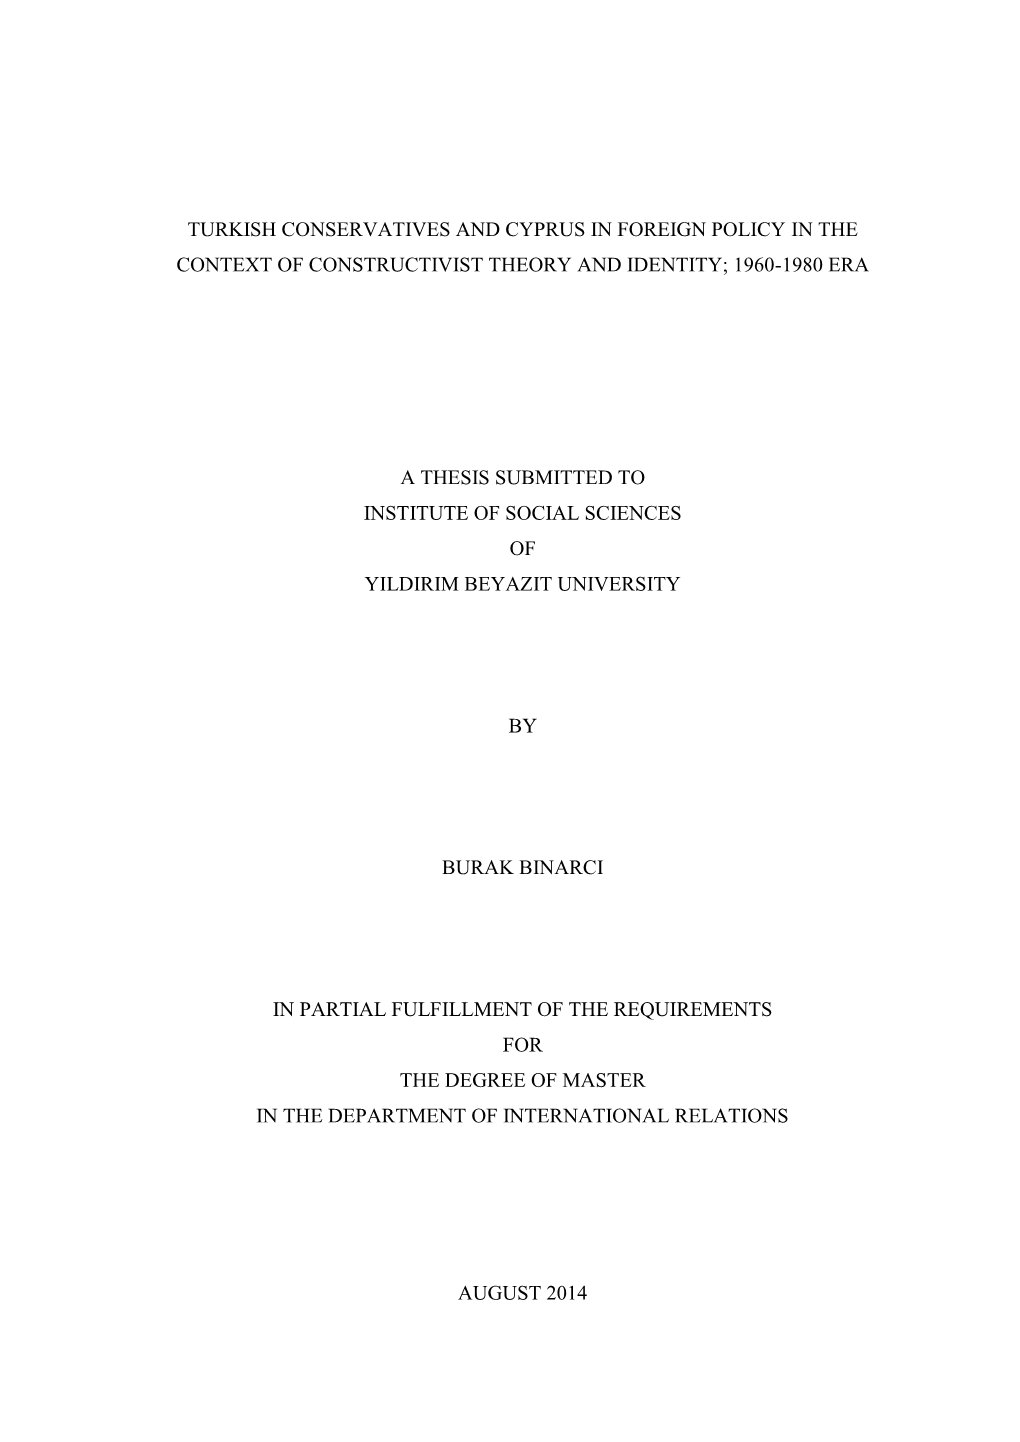 Turkish Conservatives and Cyprus in Foreign Policy in the Context of Constructivist Theory and Identity; 1960-1980 Era